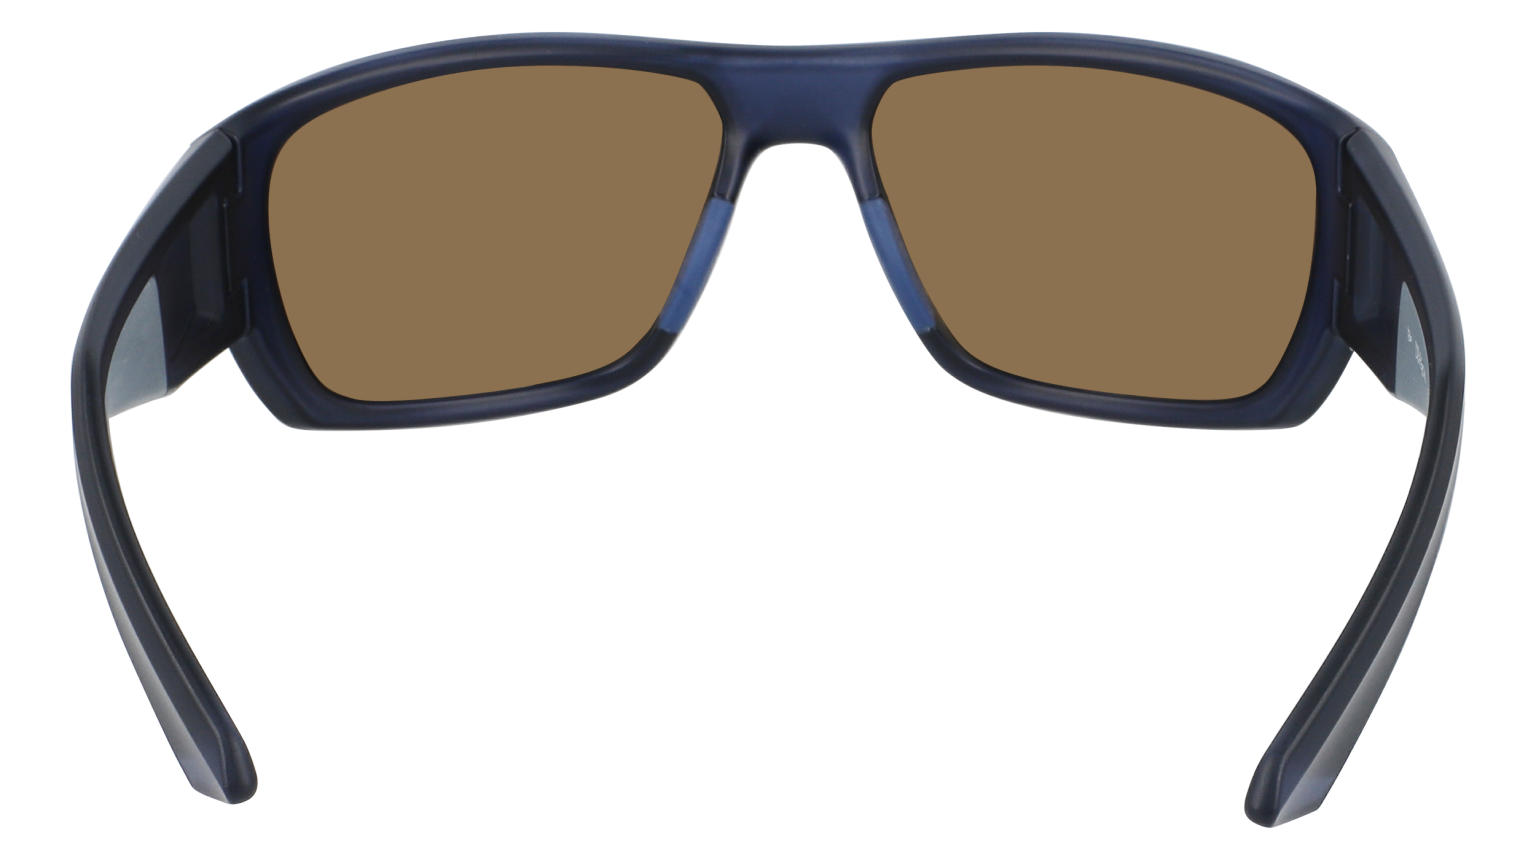 FLARE - Matte Navy with Lumalens Silver Ionized Lens